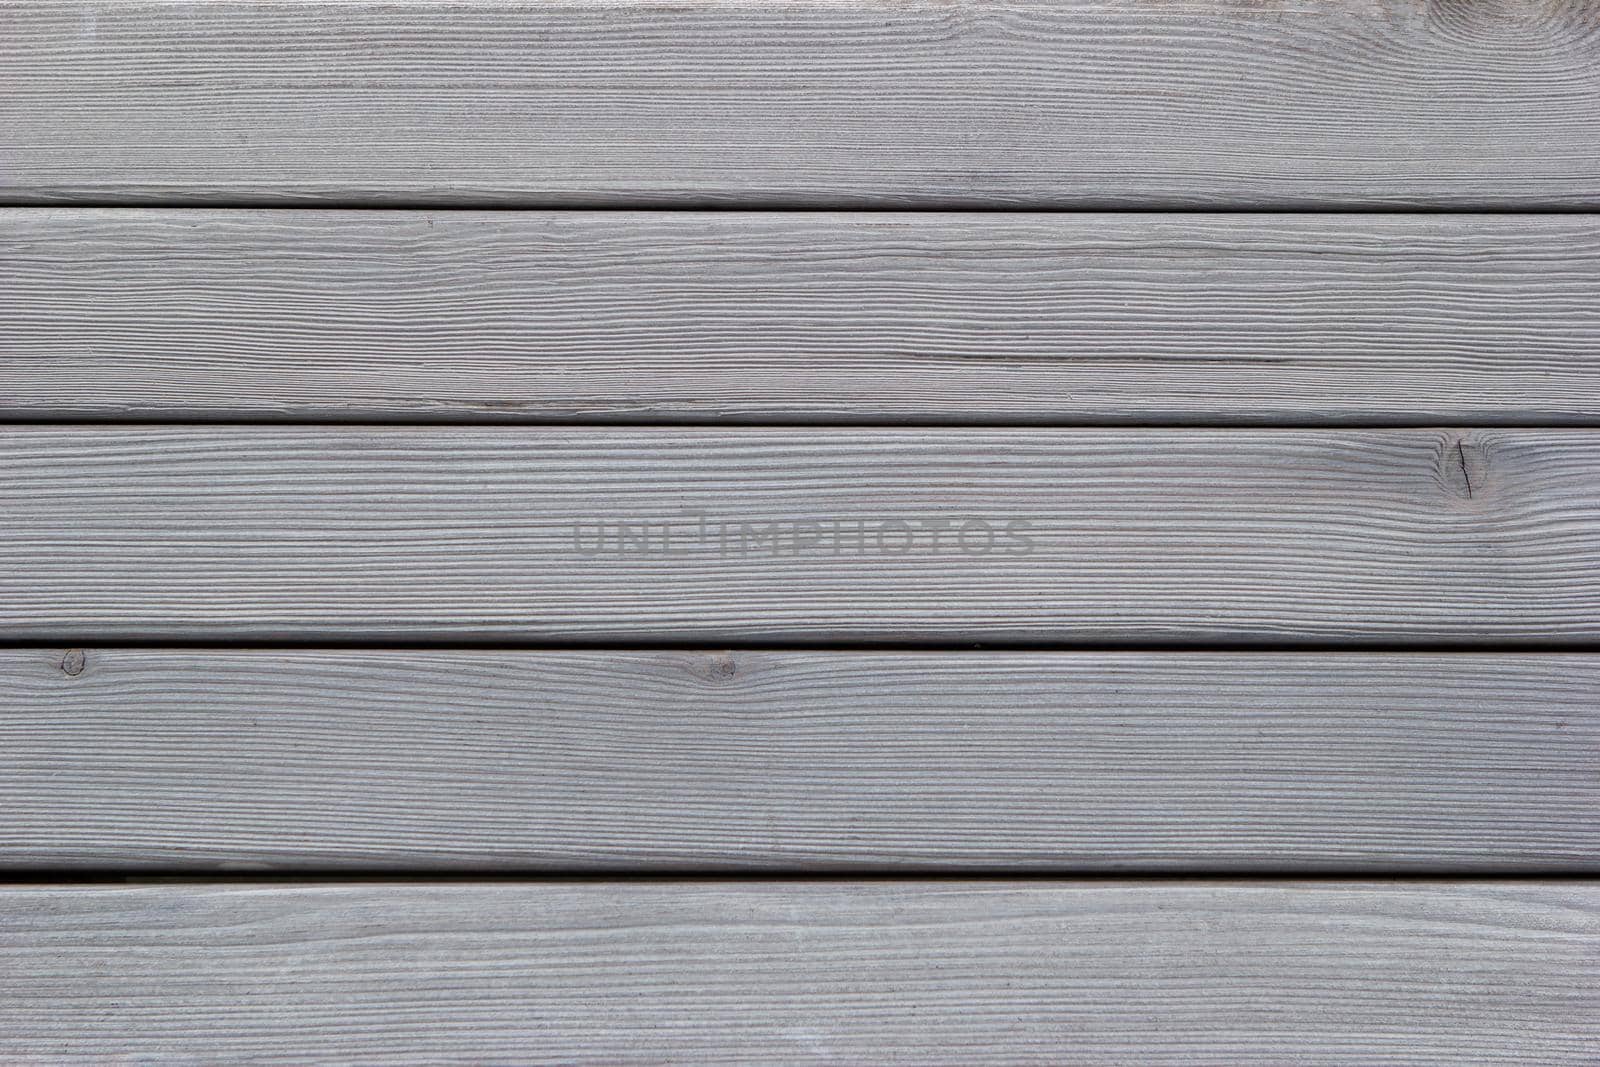 Background of wooden boards. Top view by Laguna781